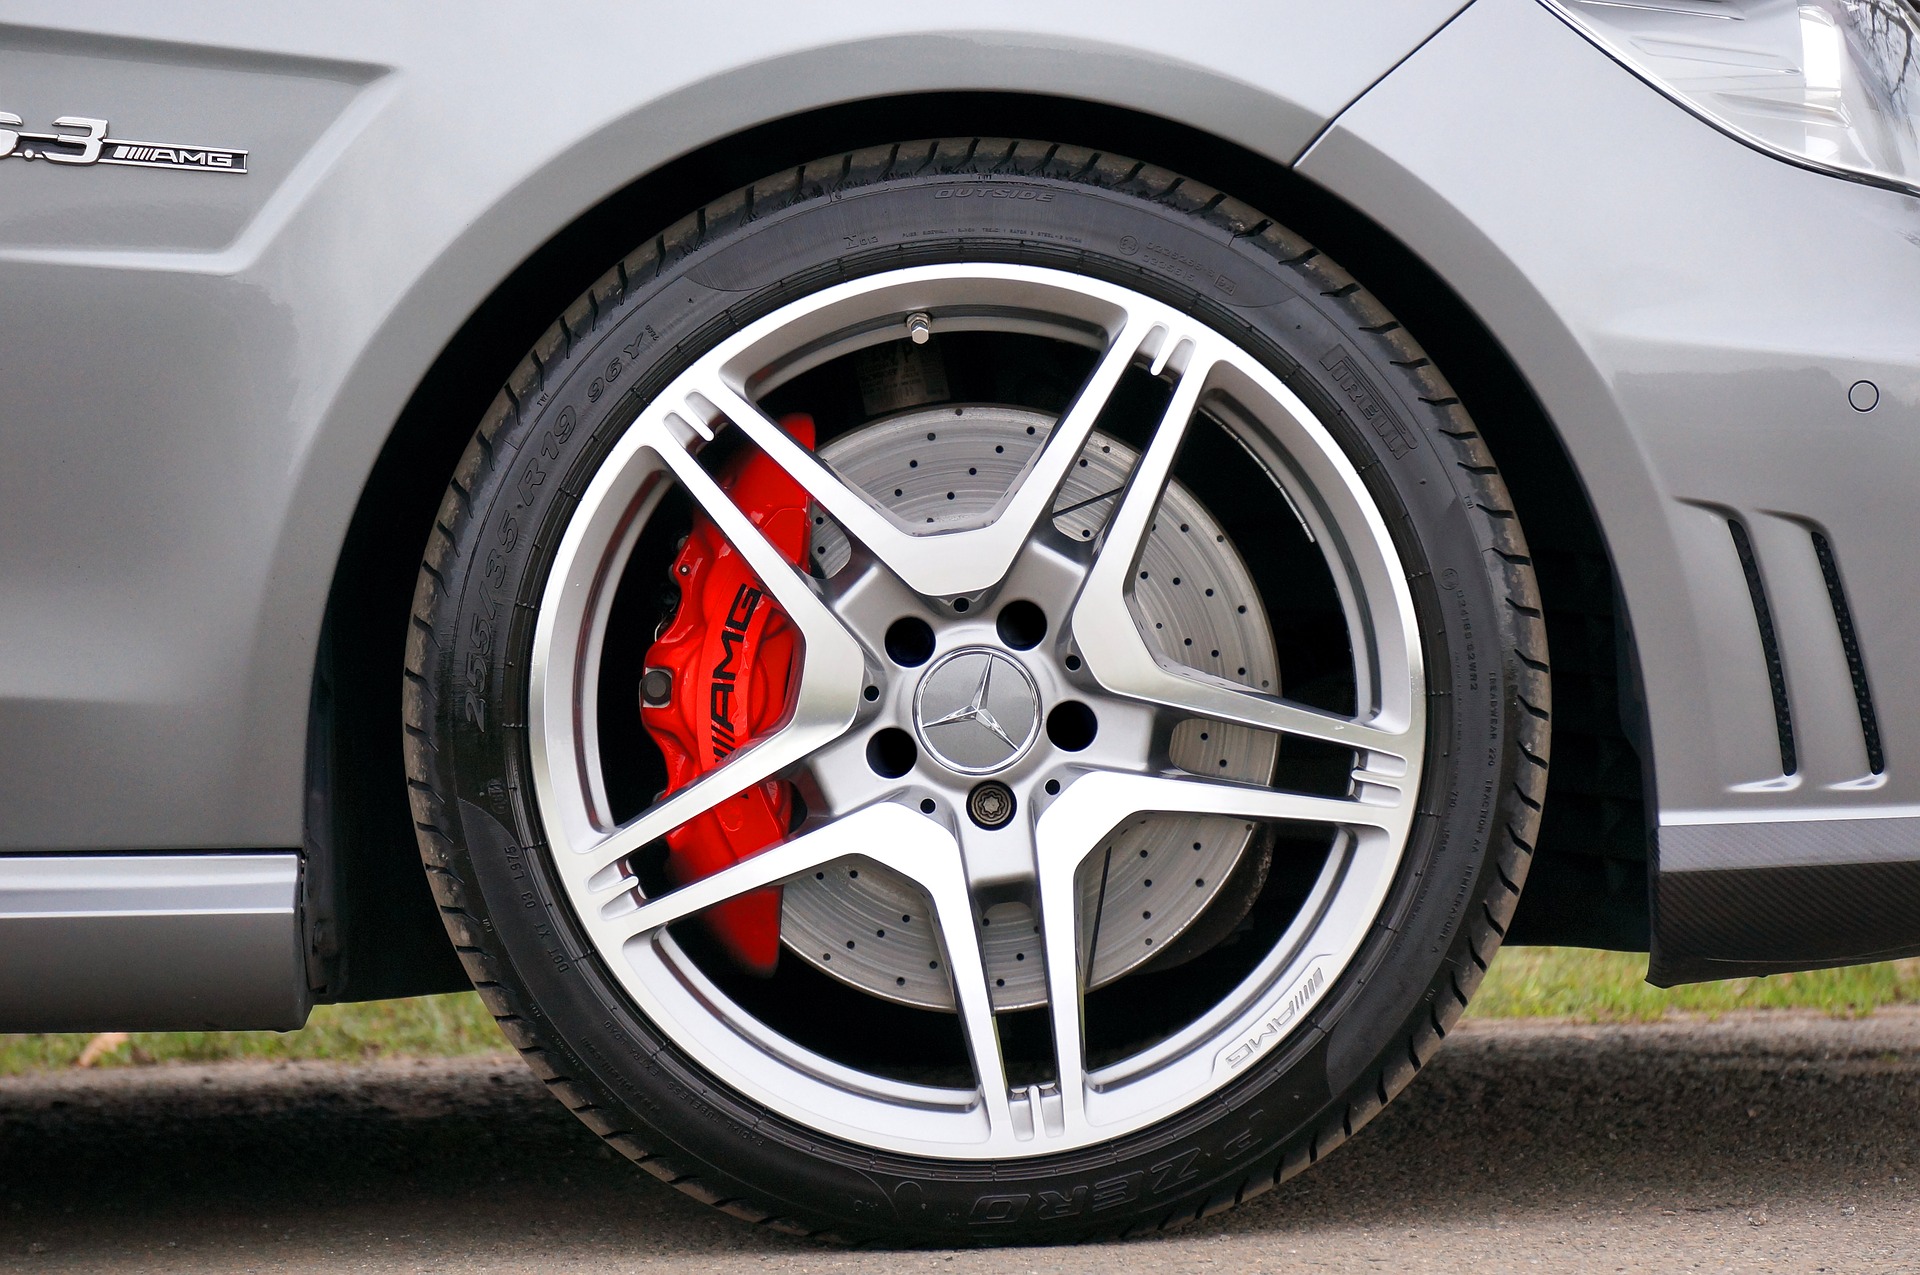 Tires with perfect aspect ratio for long distances. Much less aggressive than traction tires